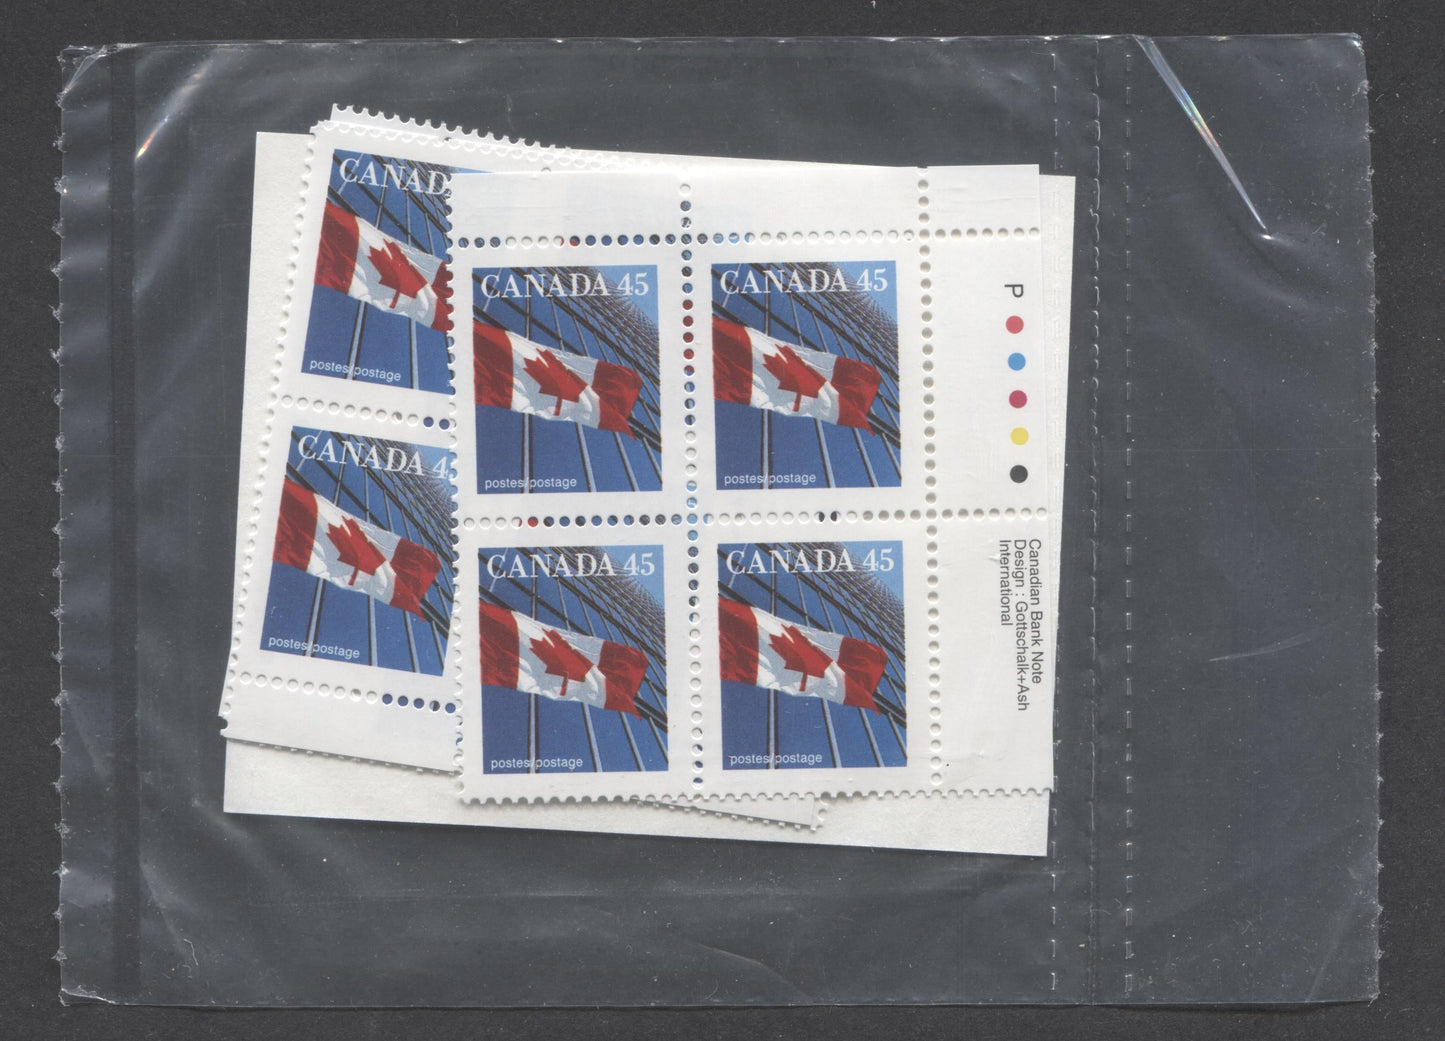 Lot 37 Canada #1361xiii 45c Multicoloured 1996 Domestic First-Class Rate Issue, Canada Post Sealed Pack of Inscription Blocks, CBN Printing On DF Peterborough Paper, With HB Type 6C Insert Card, VFNH, Unitrade Cat. $20